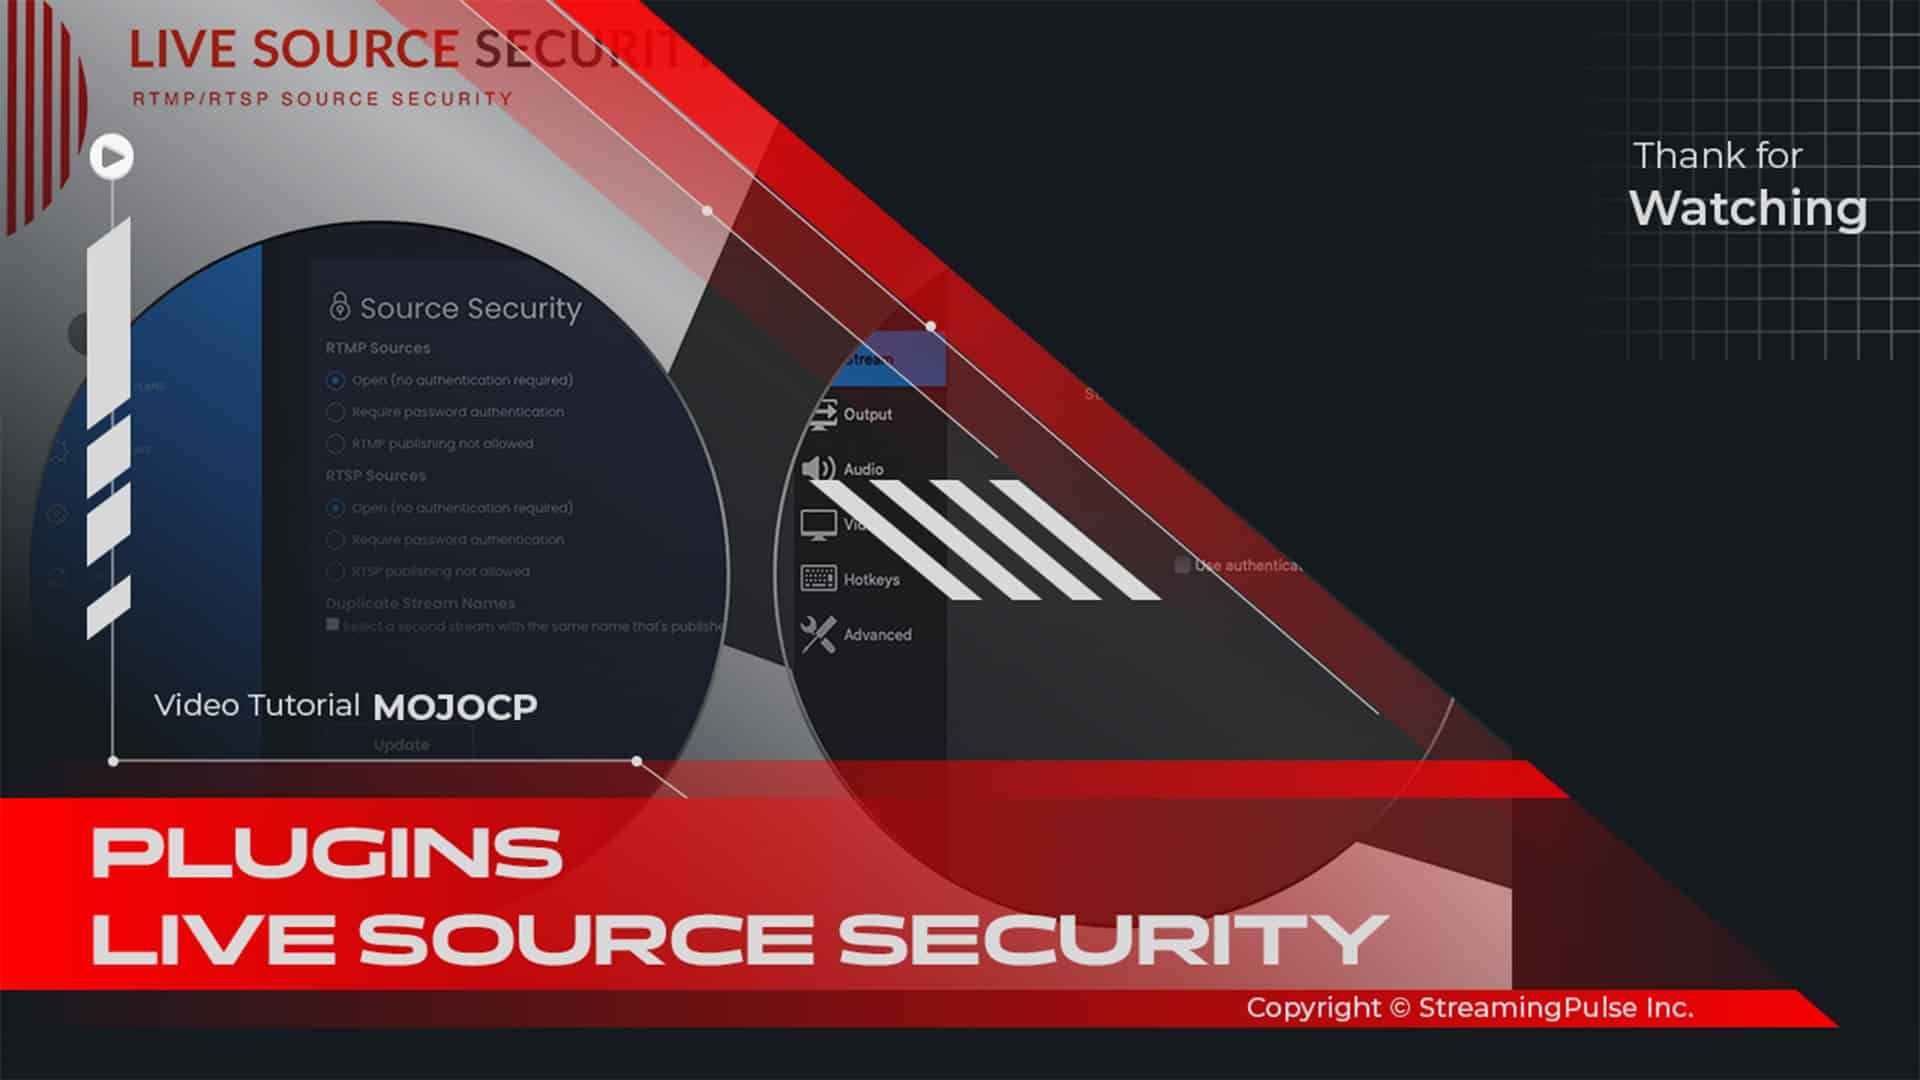 Live Source Security